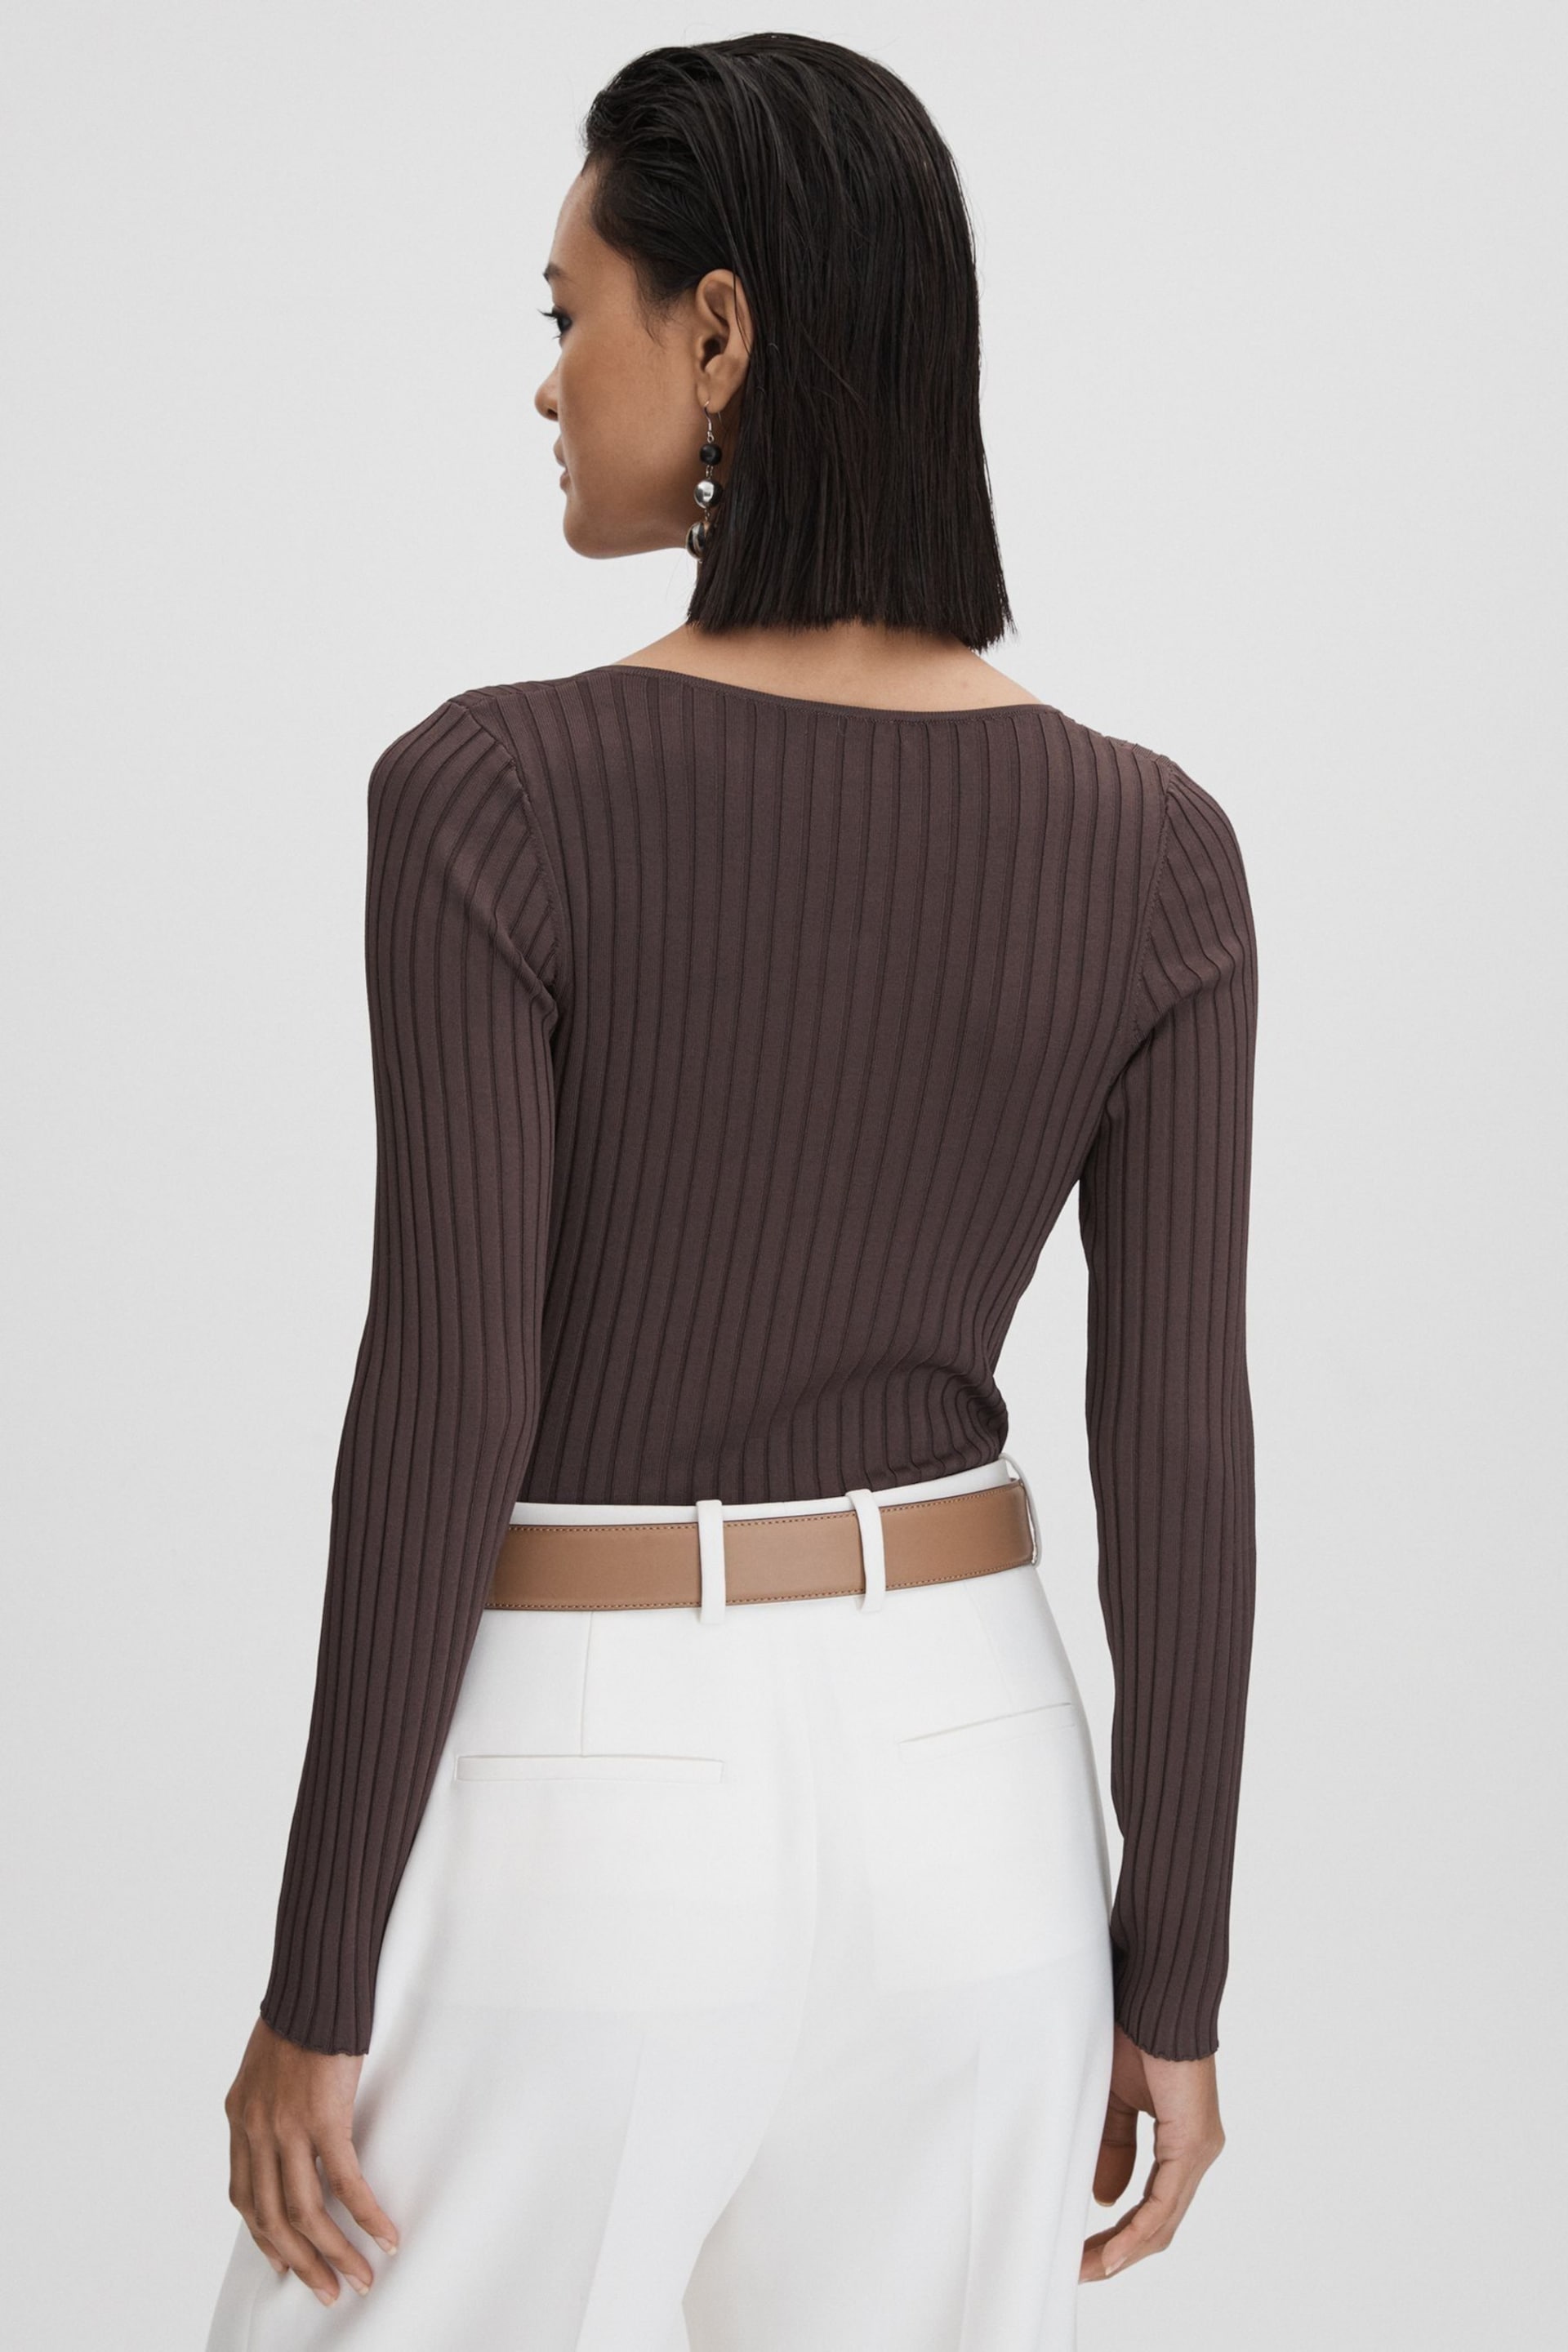 Reiss Burgundy Monica Ribbed Open Collar Top - Image 5 of 6